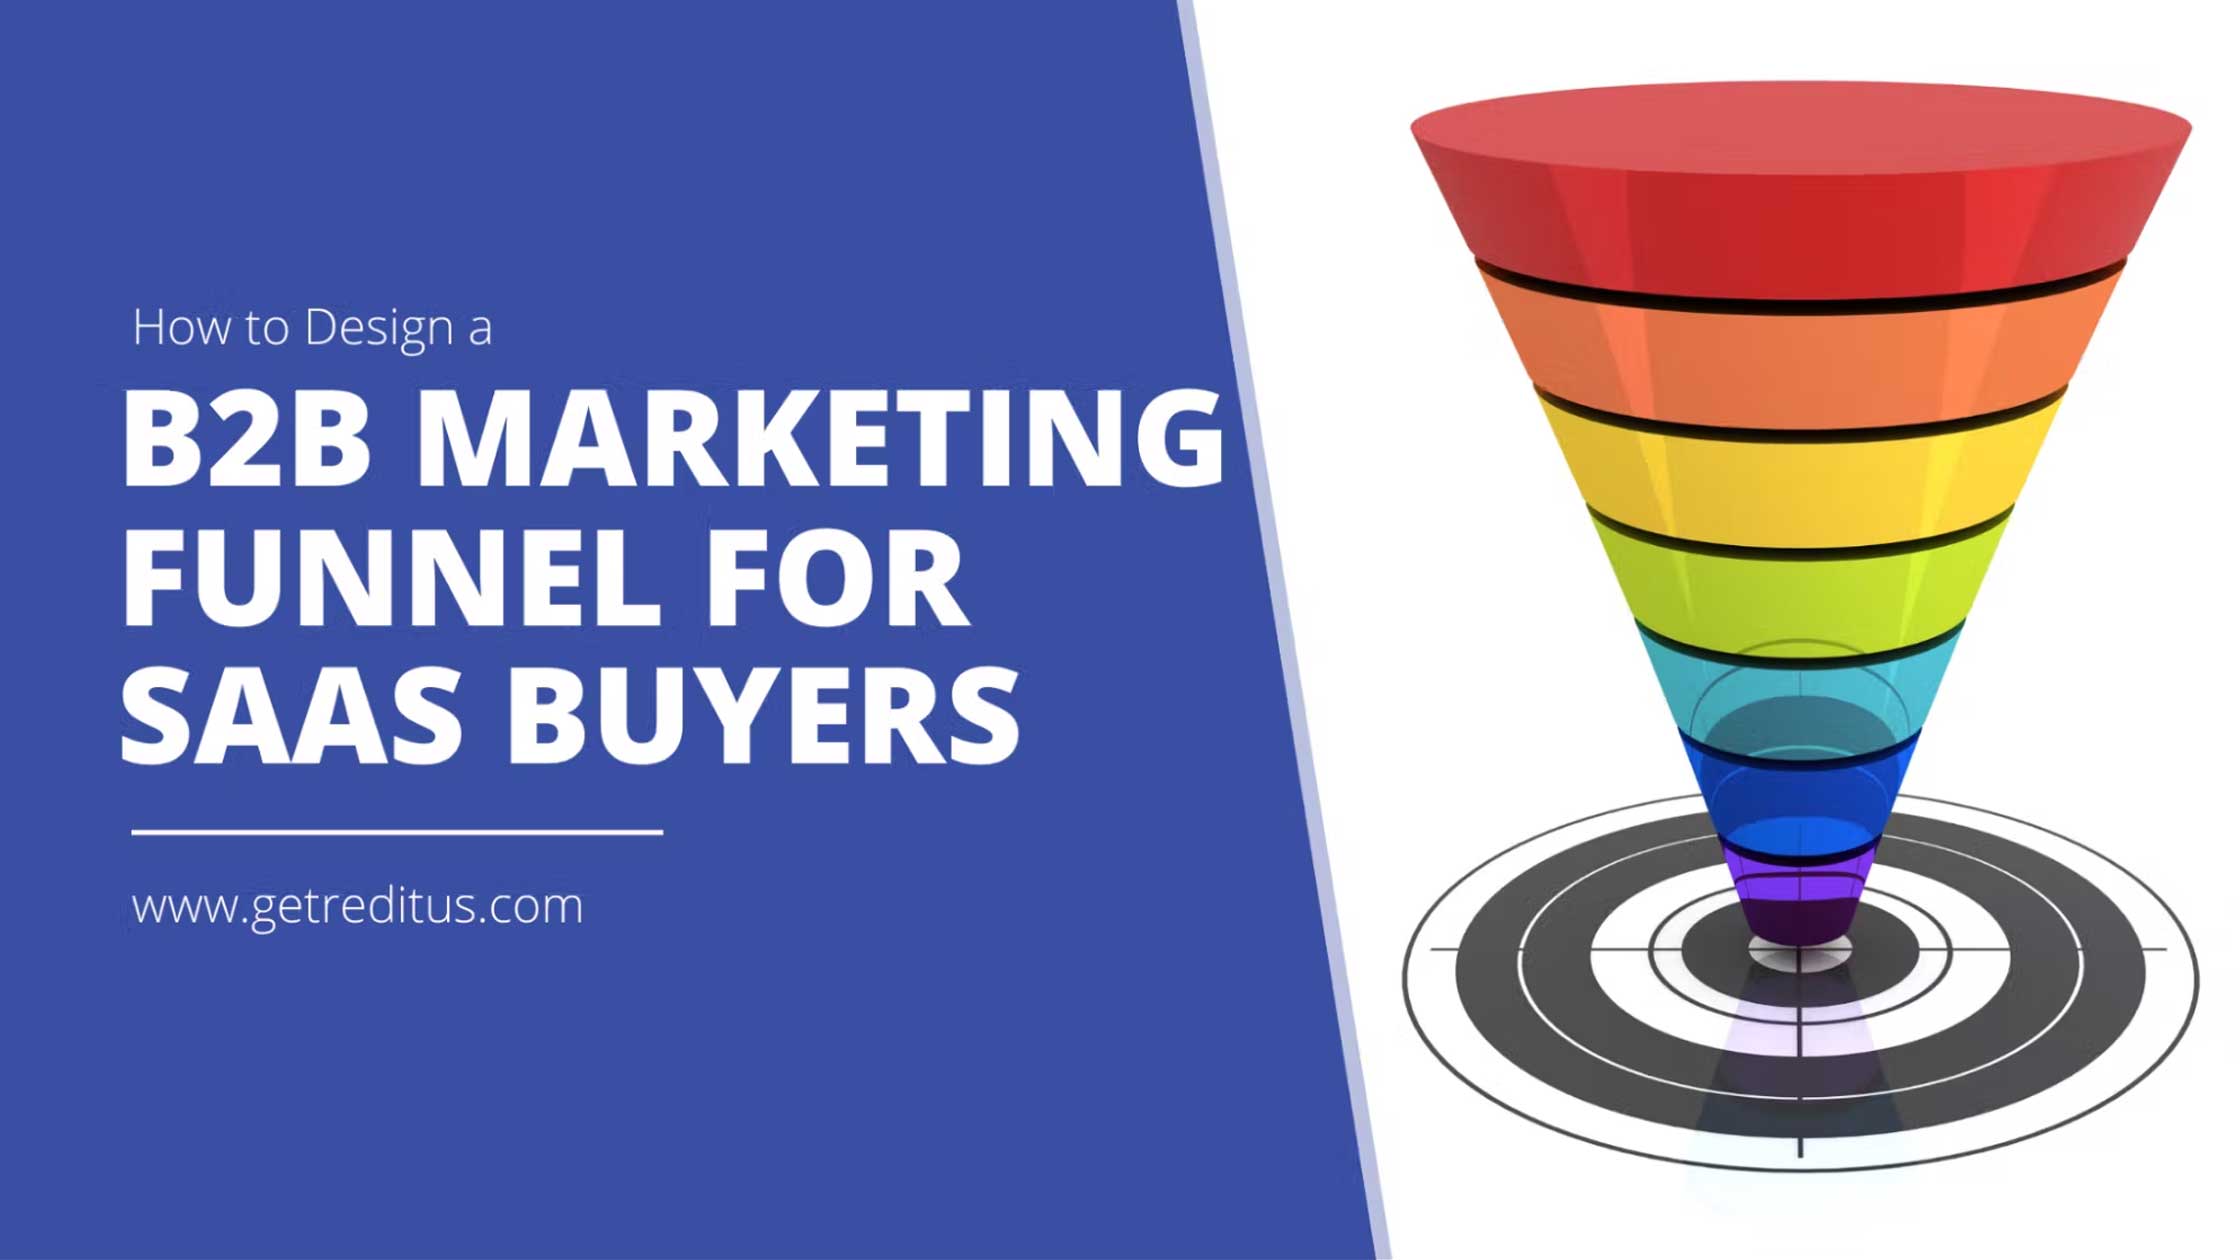 How to build a B2B Marketing Funnel that works for your SaaS.